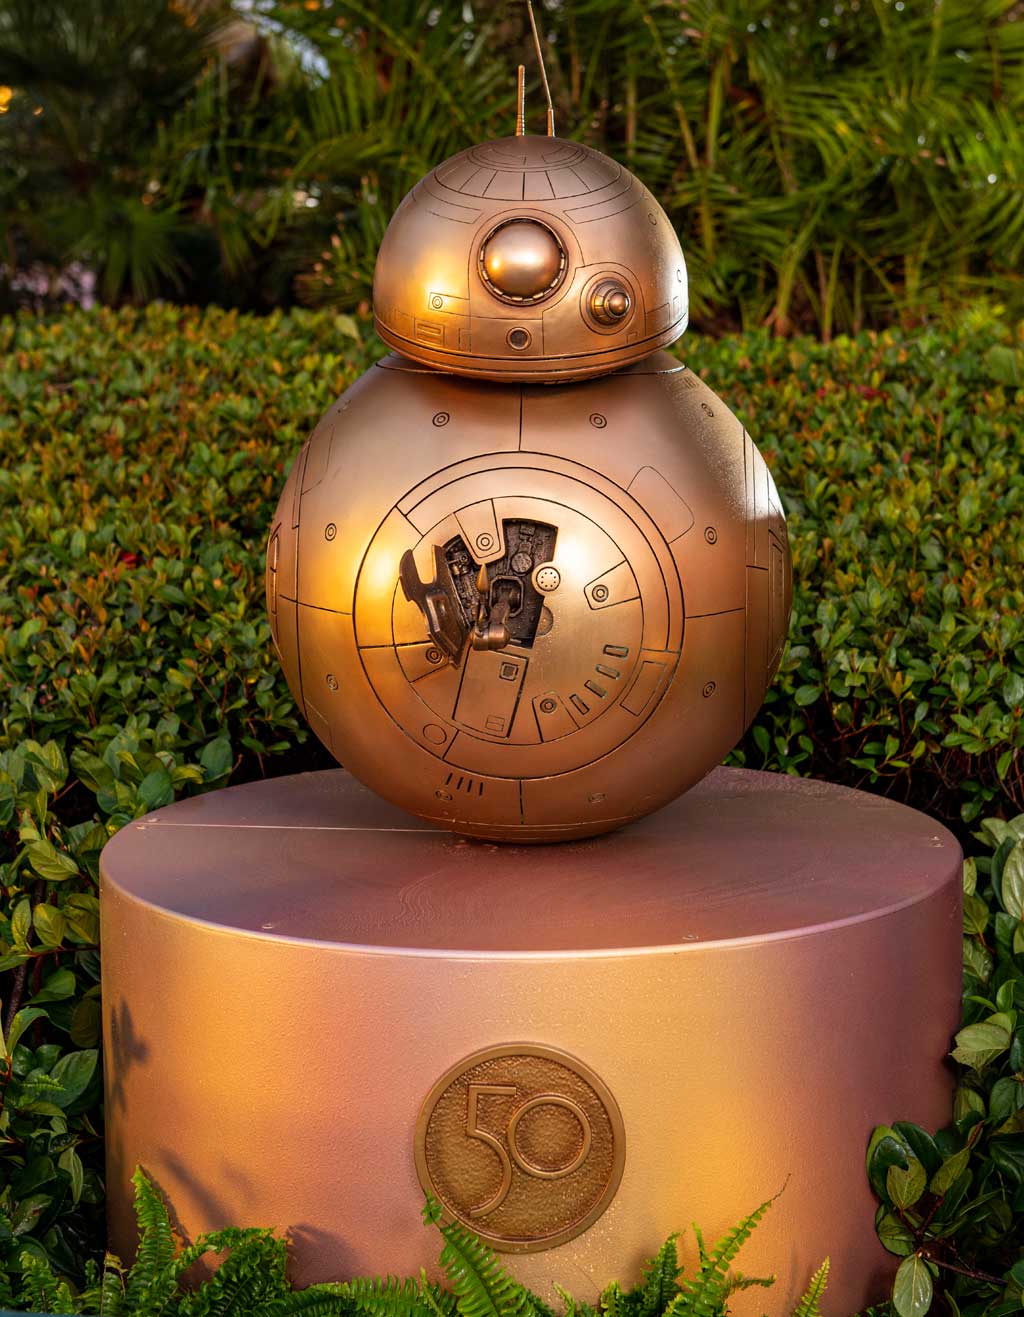 BB-8 at Disney’s Hollywood Studios is one of the “Disney Fab 50 Character Collection” appearing in all four Walt Disney World Resort theme parks in Lake Buena Vista, Fla., as part of “The World’s Most Magical Celebration,” beginning Oct. 1, 2021, in honor of the resort’s 50th anniversary. (David Roark, photographer)